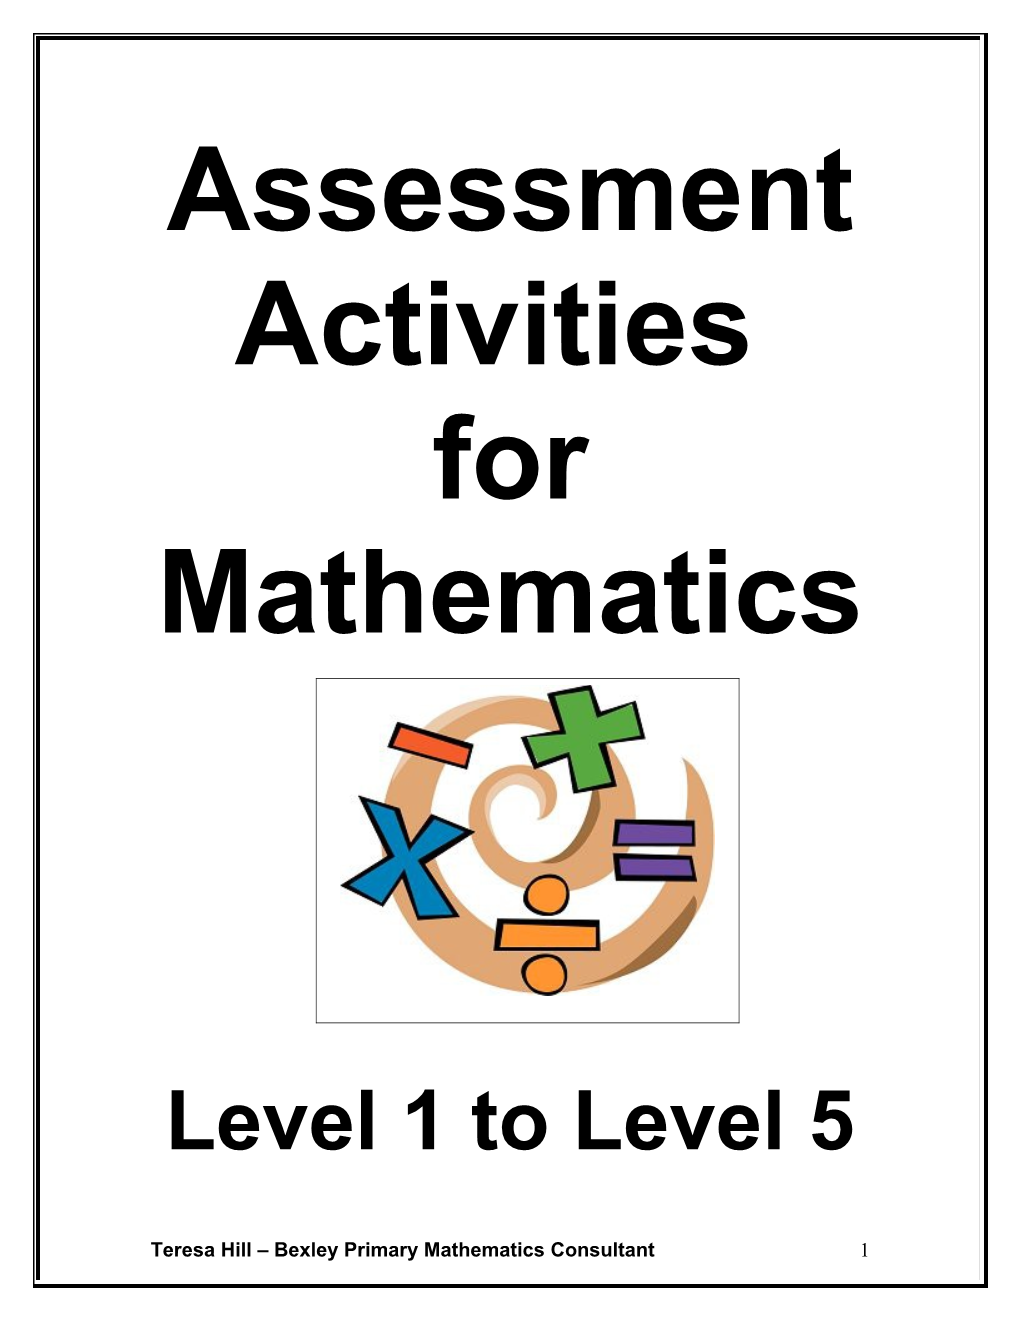 In This Booklet There Are Example Assessment Activities for Mathematics Levels 1 to 5